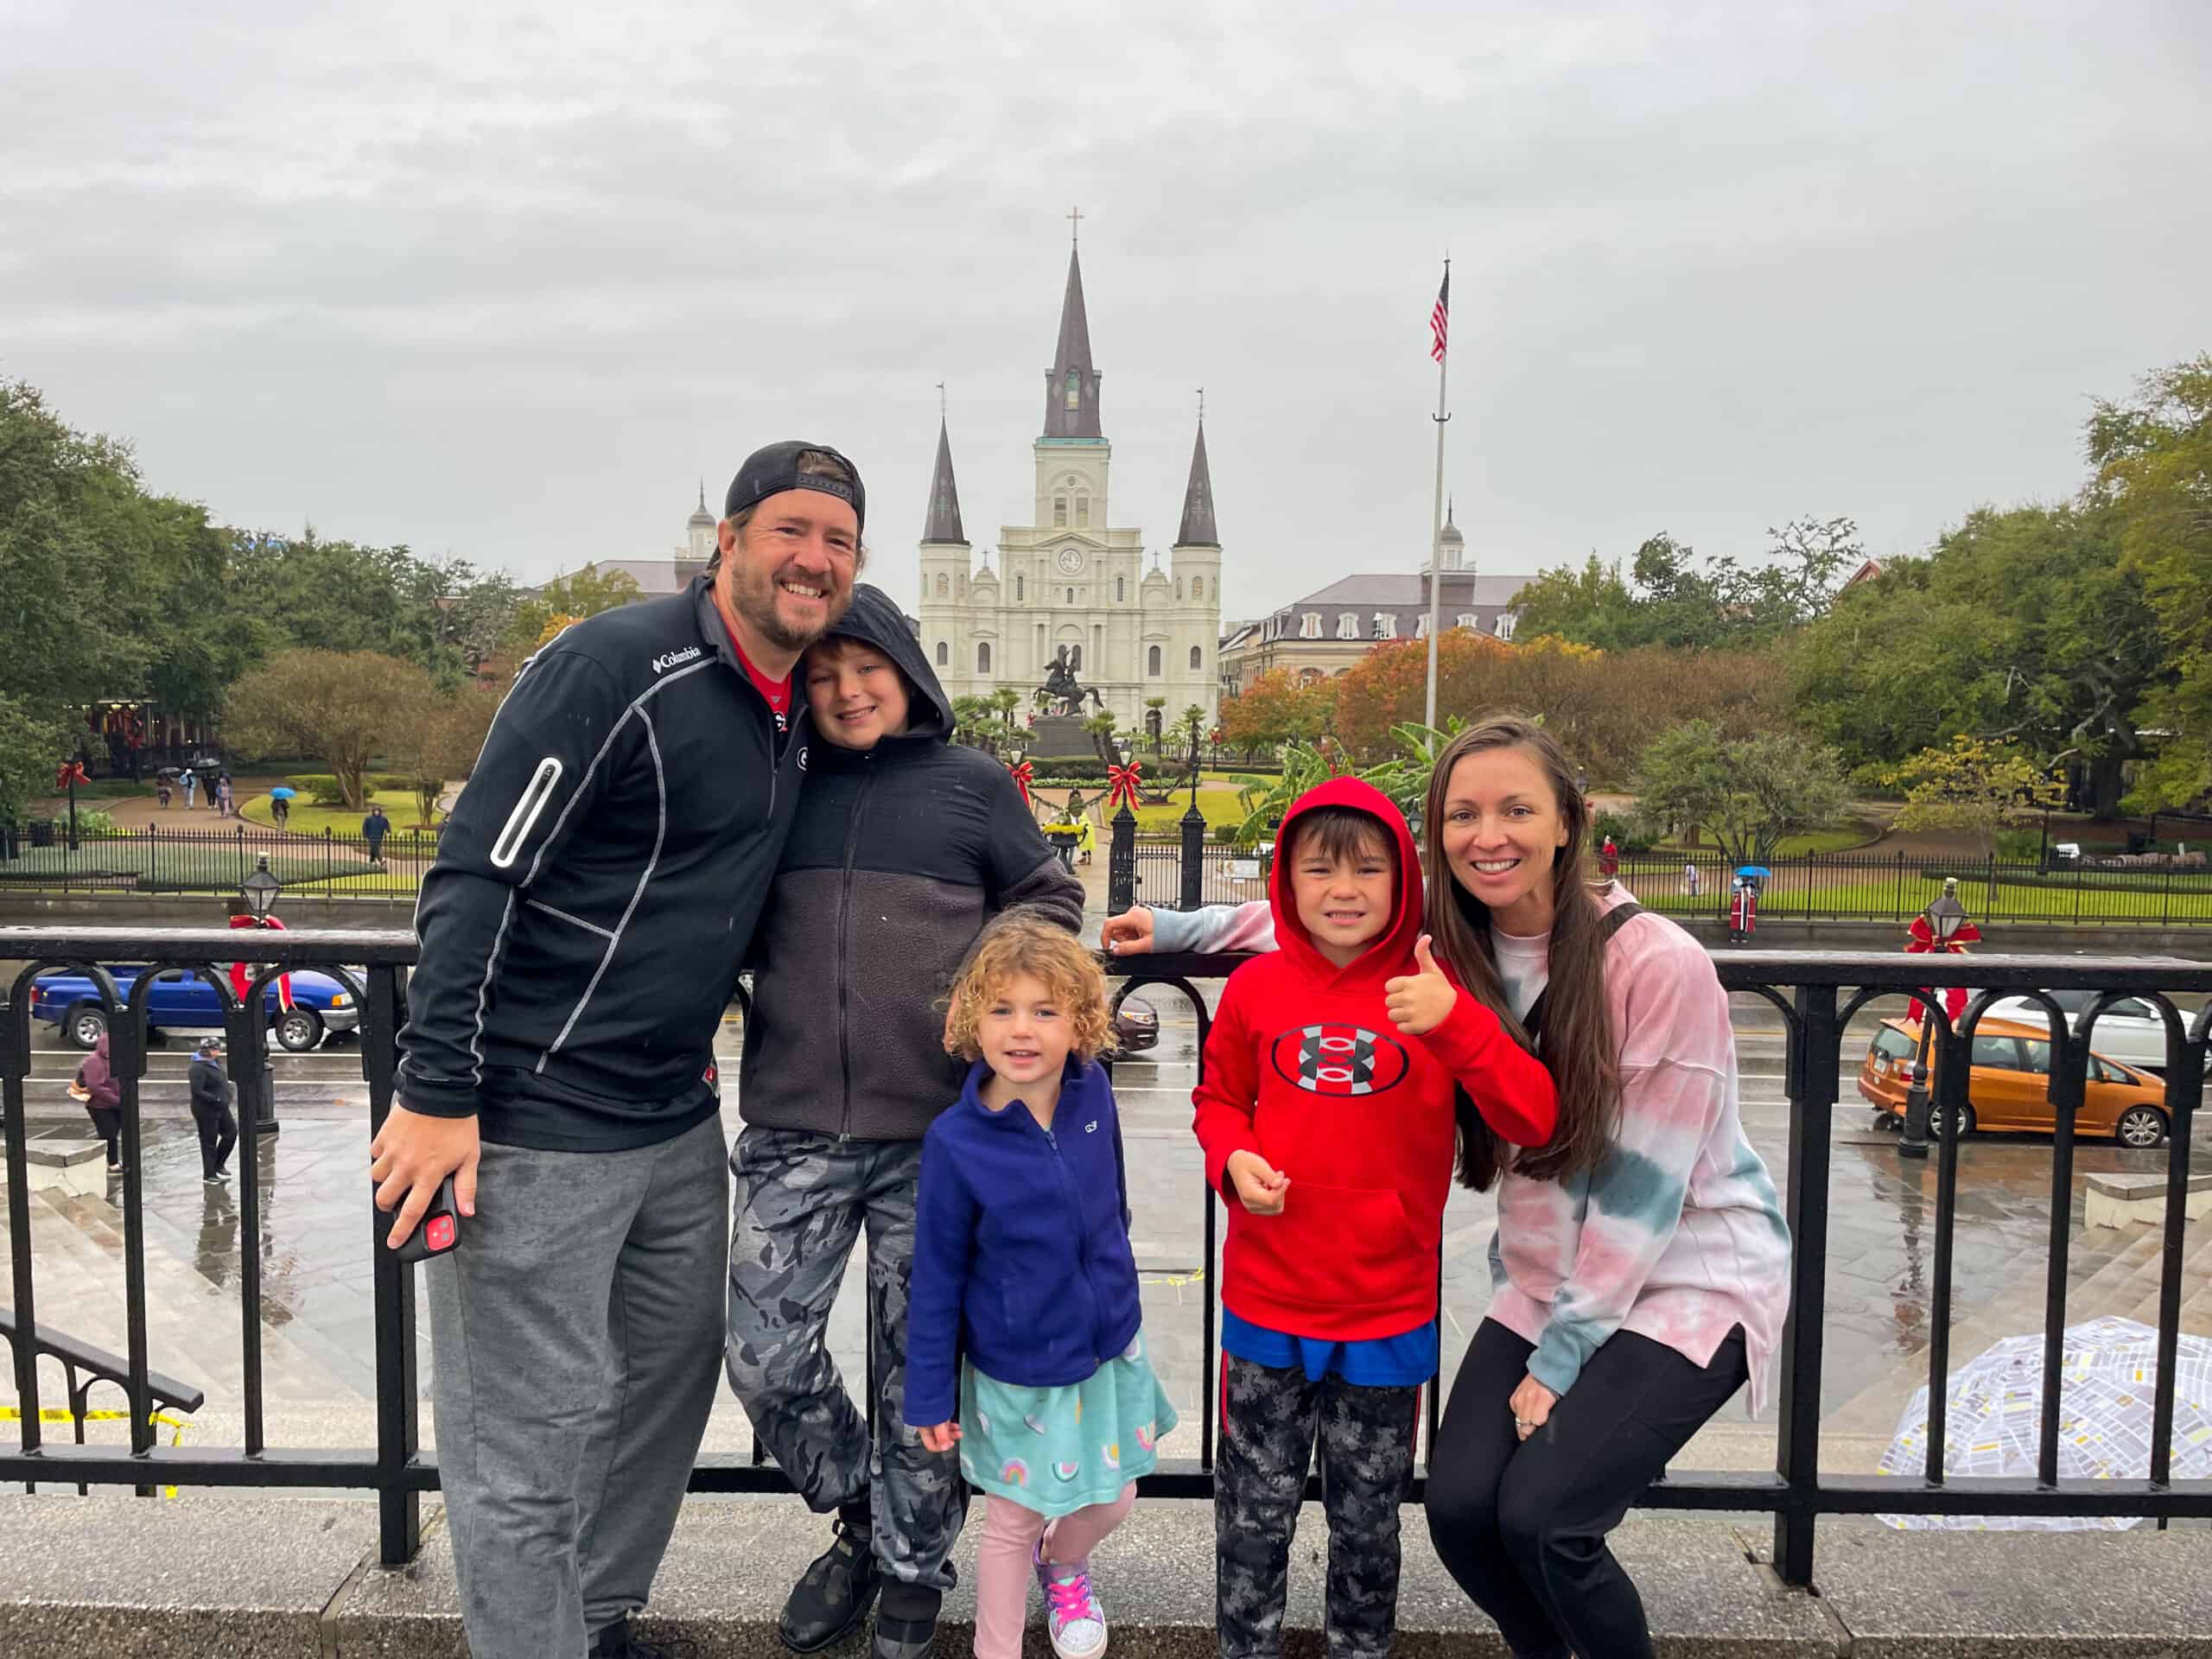 Jackson Square memories on our road trip to New Orleans